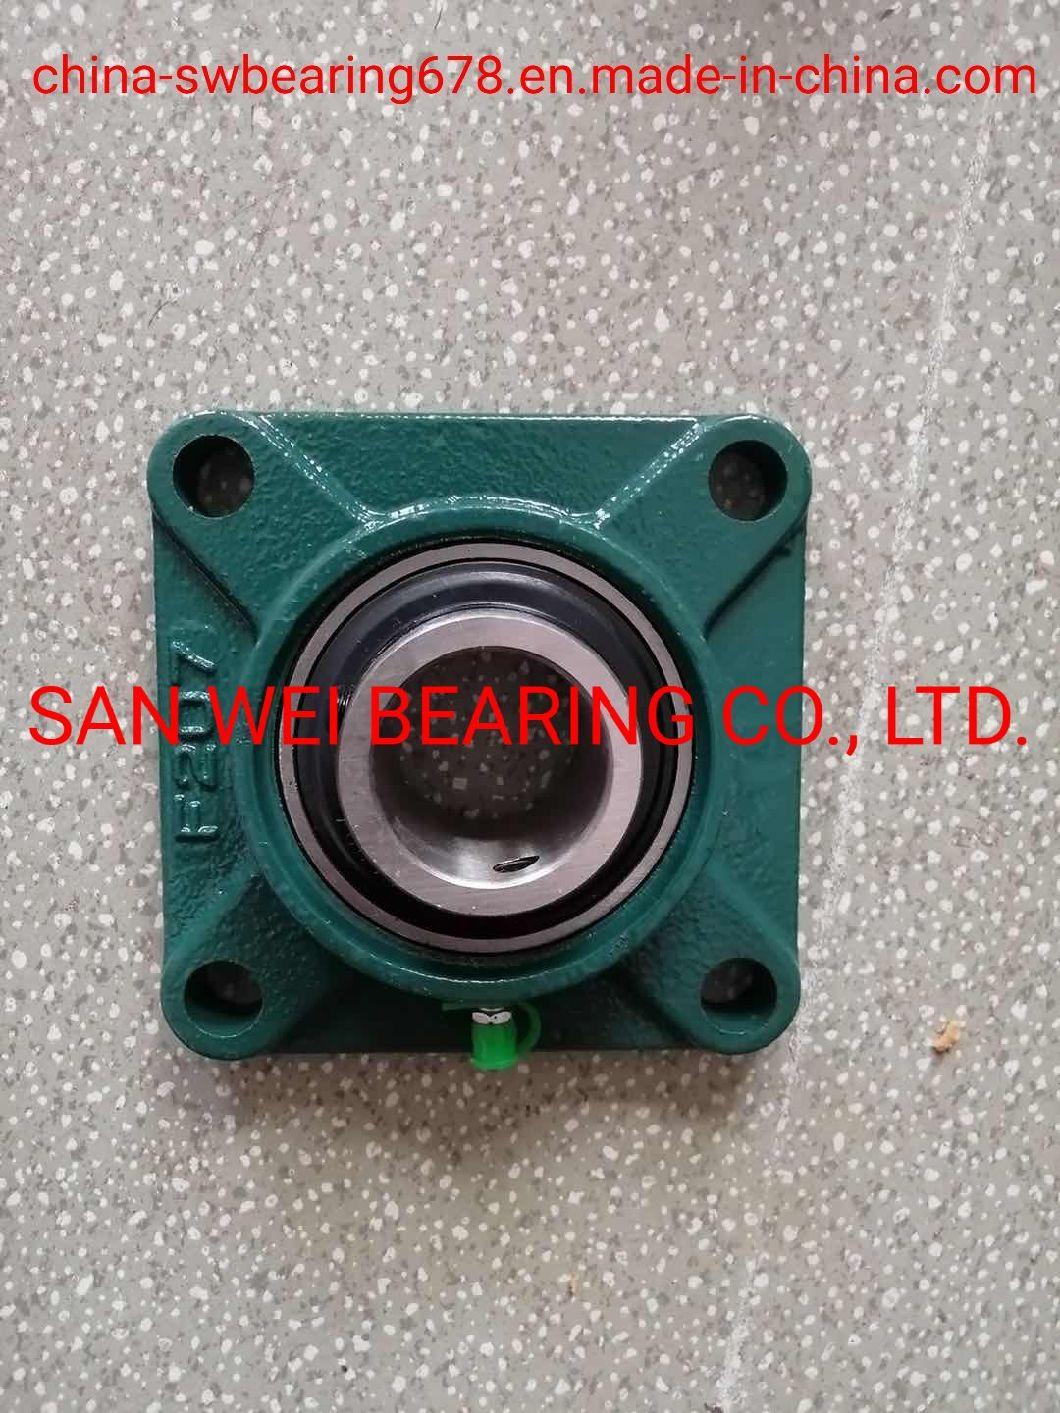 Auto Parts Pillow Block Bearing (UCP208) Motorcycle Spare Part